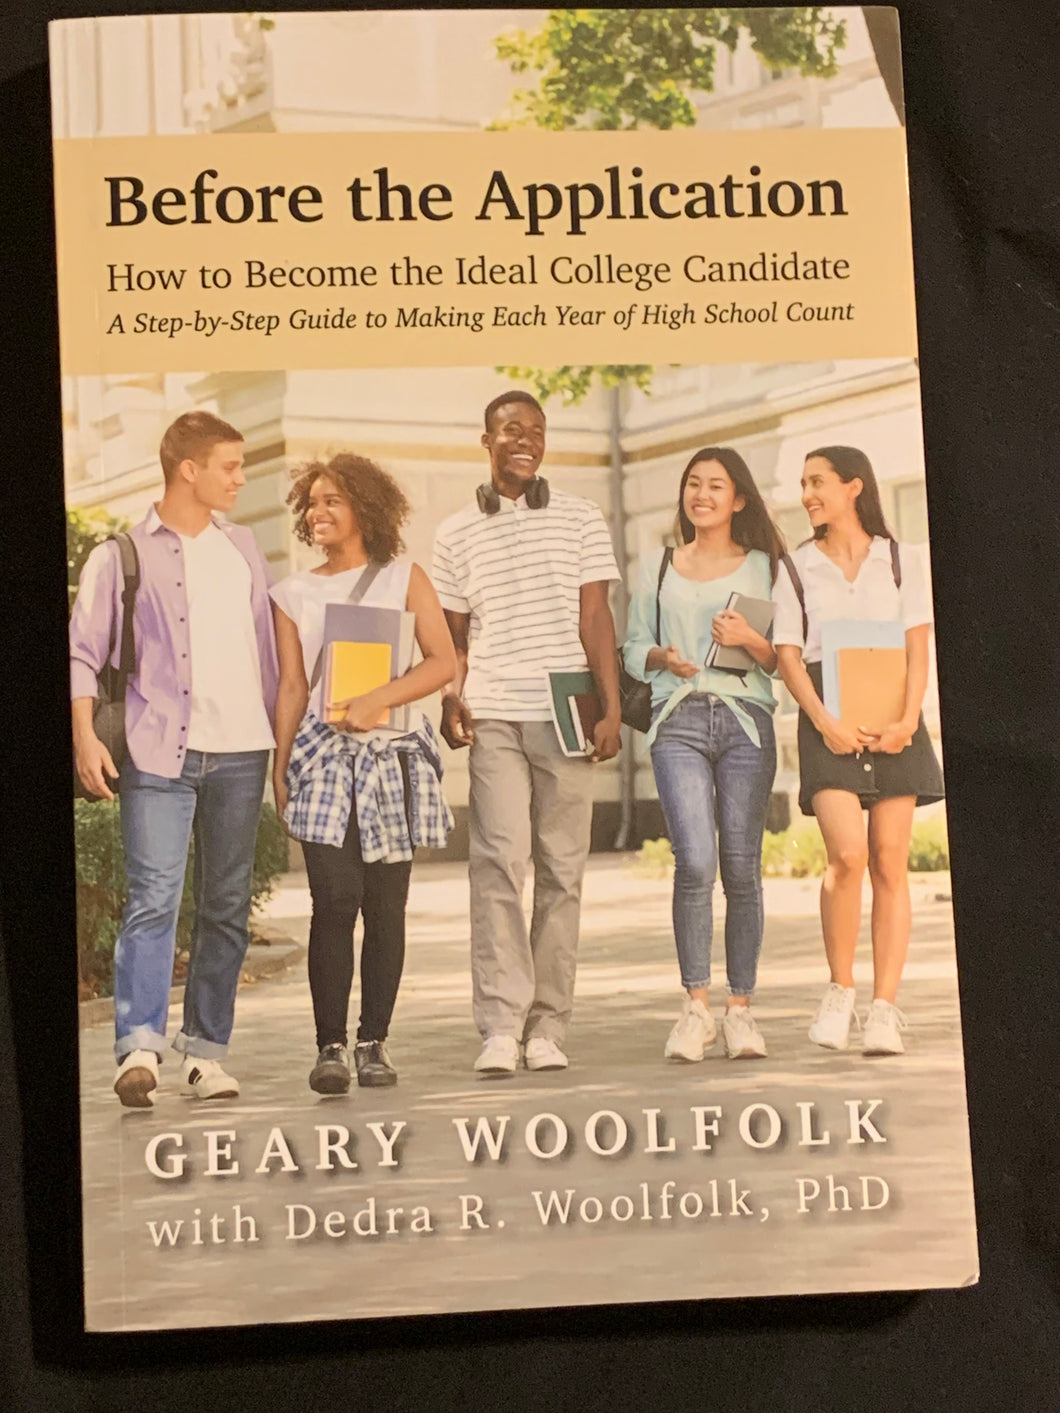 Before the Application. How to Become the Ideal College Candidate. A Step-by-Step Guide to Making Each Year of High School Count.